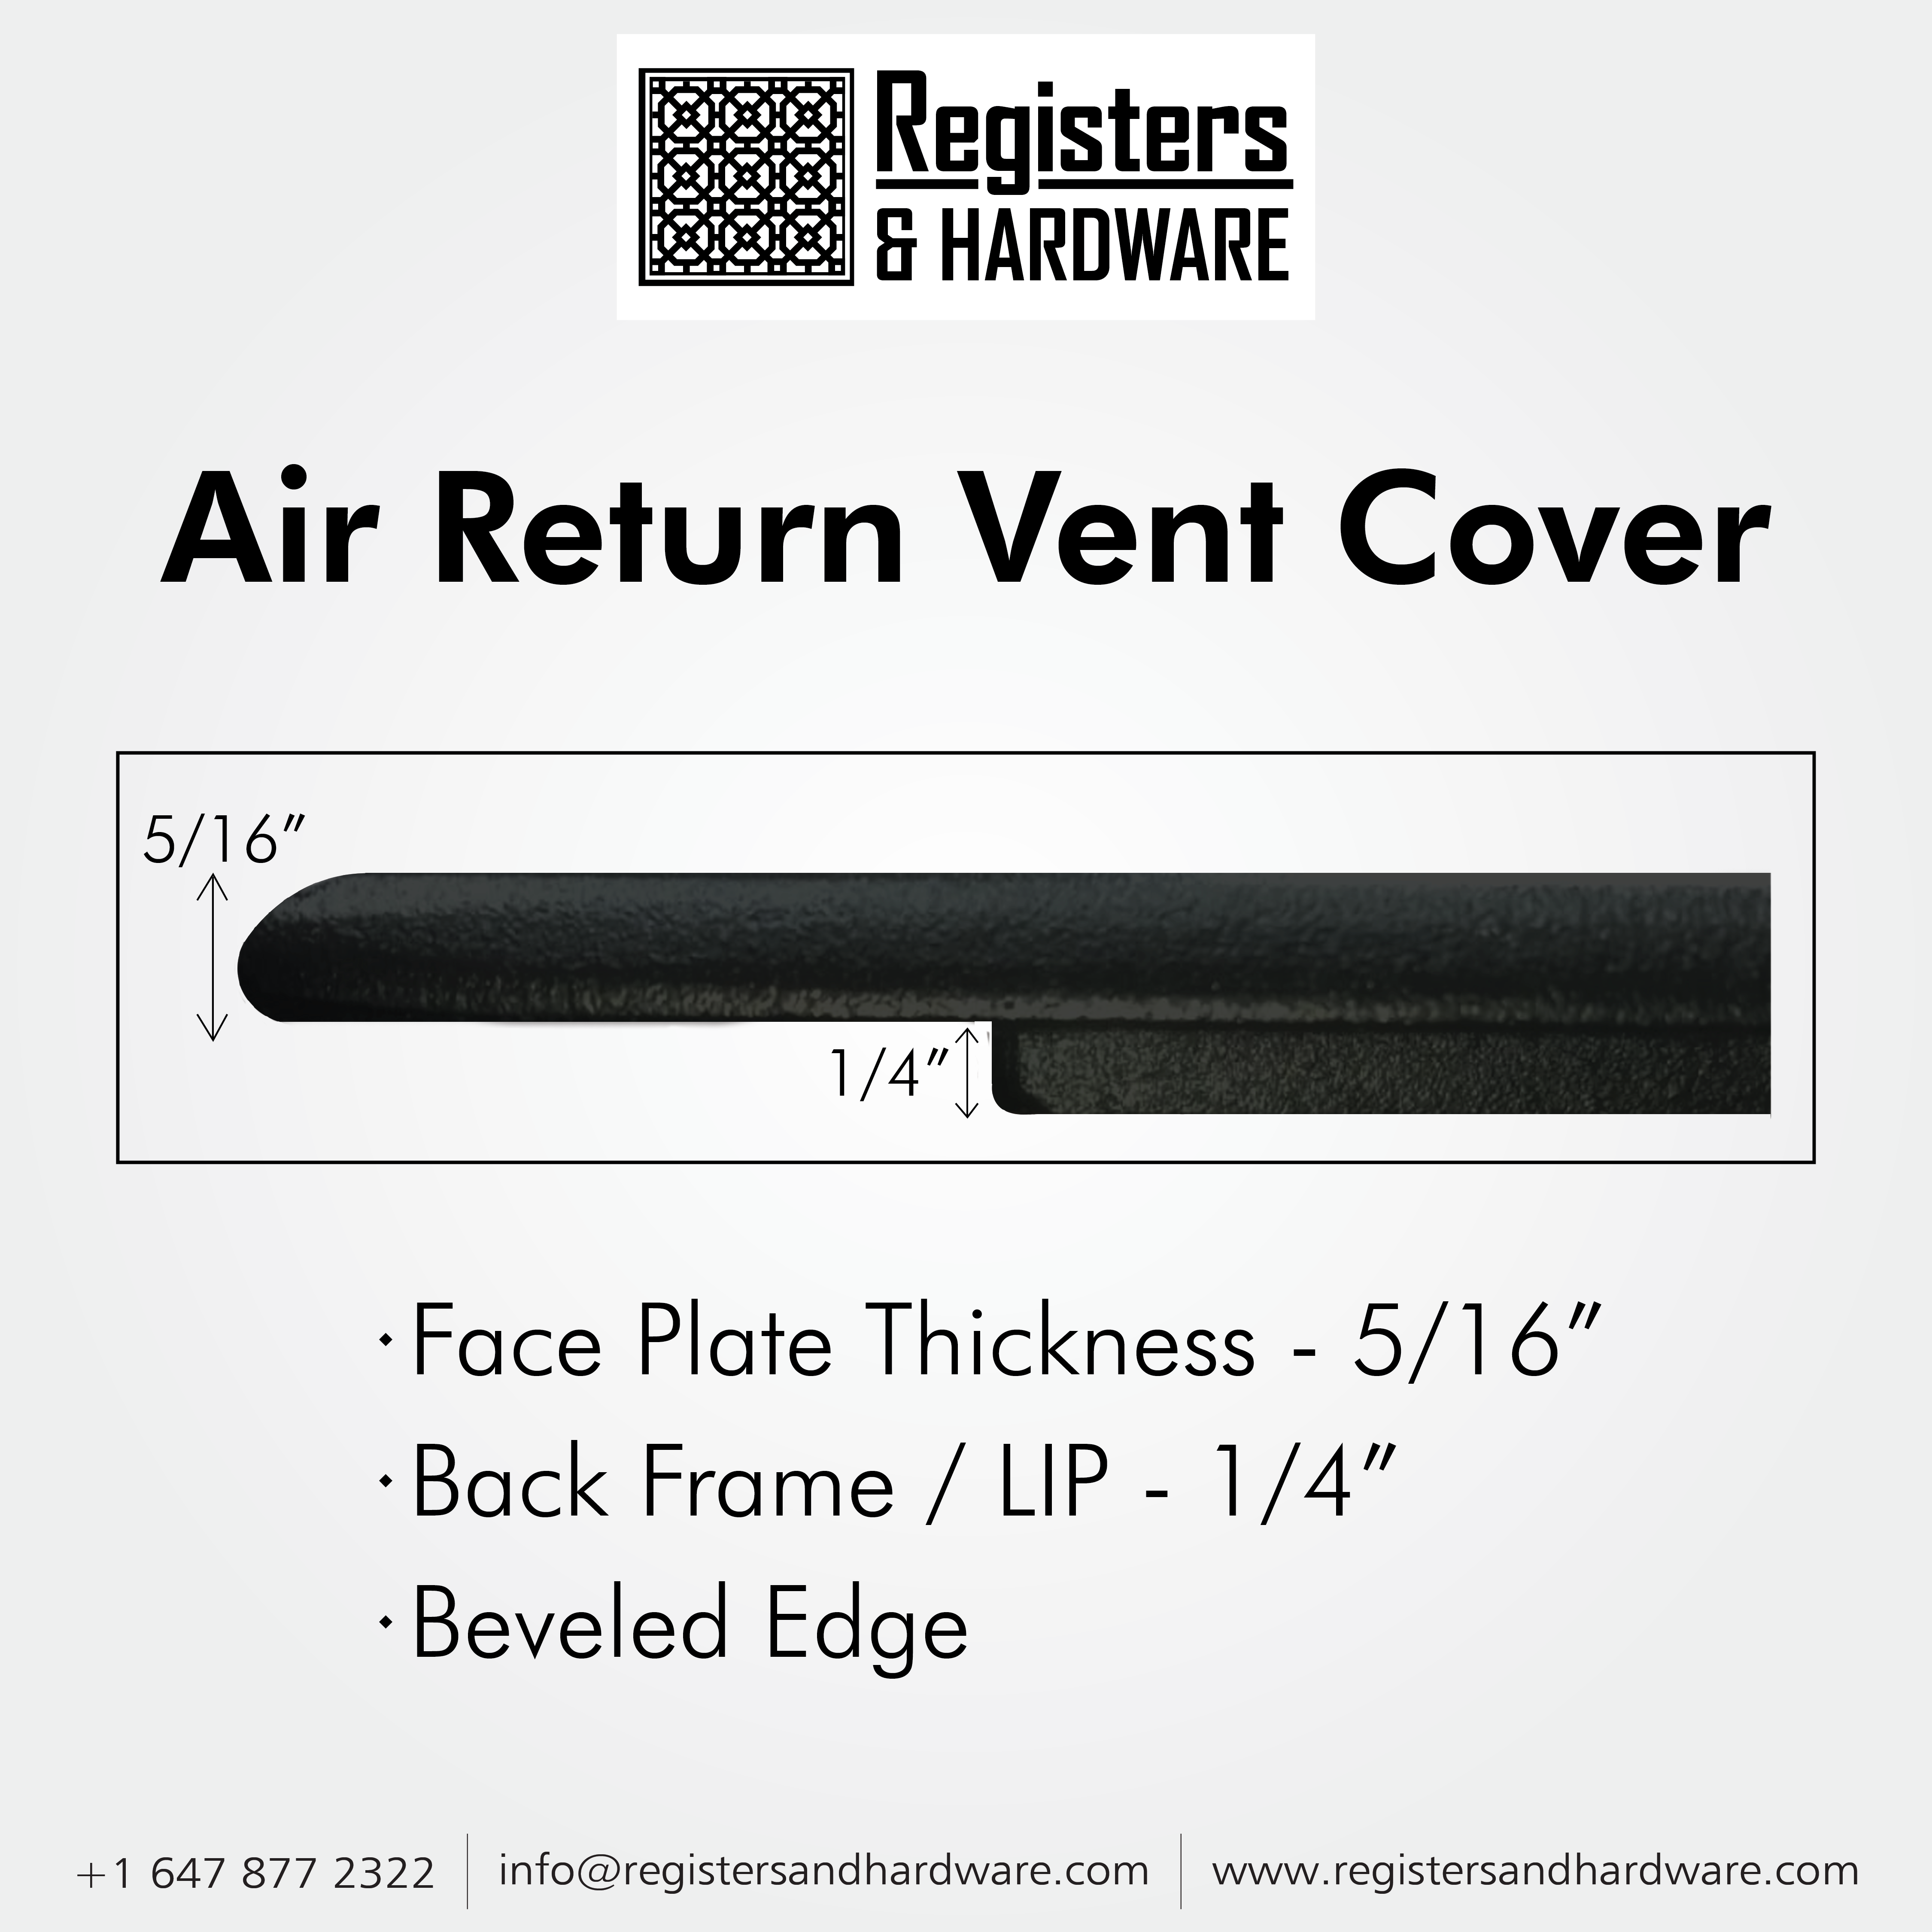 Achtek AIR RETURN 10"x12" Duct Opening (Overall Size 12"x14") | Heavy Cast Aluminum Air Grille HVAC Duct || Powder Coated